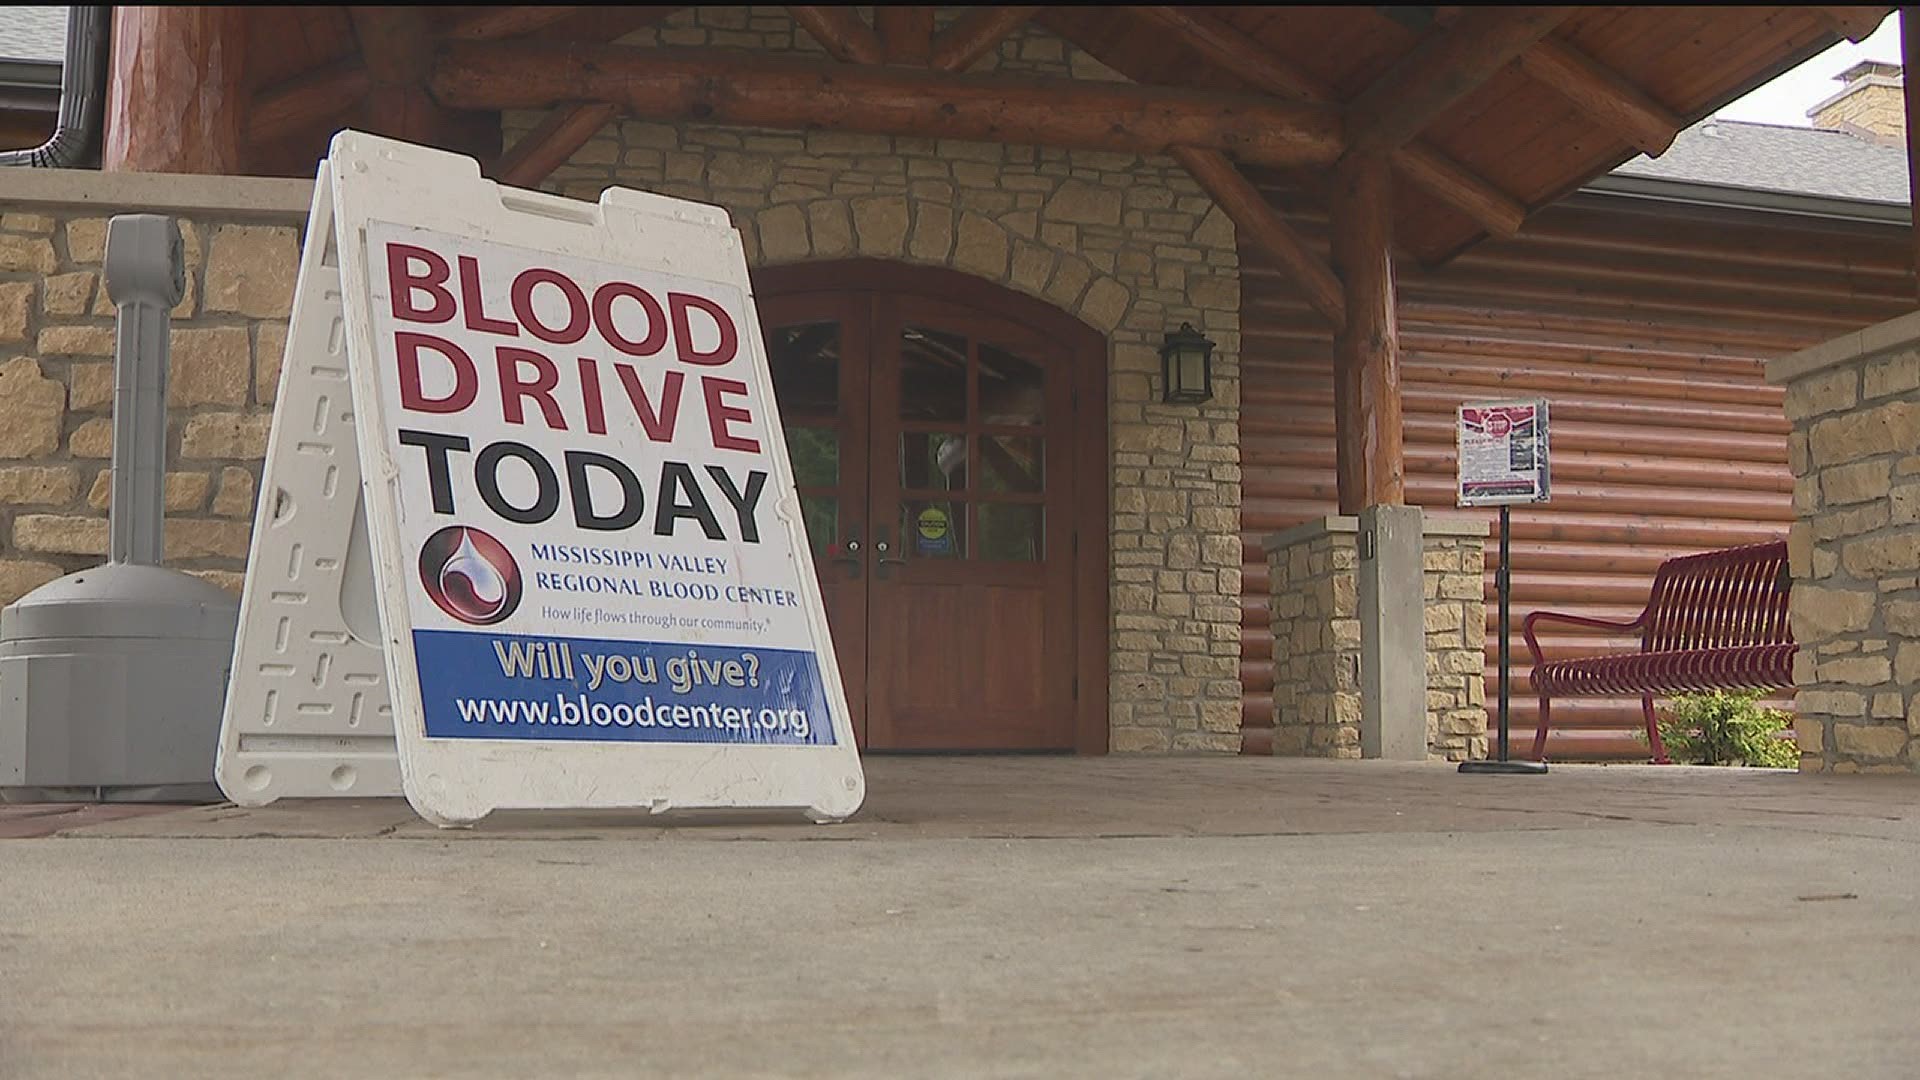 The Mississippi Valley Regional Blood Center says they will lose around 20,000 units of blood from now until Labor Day.